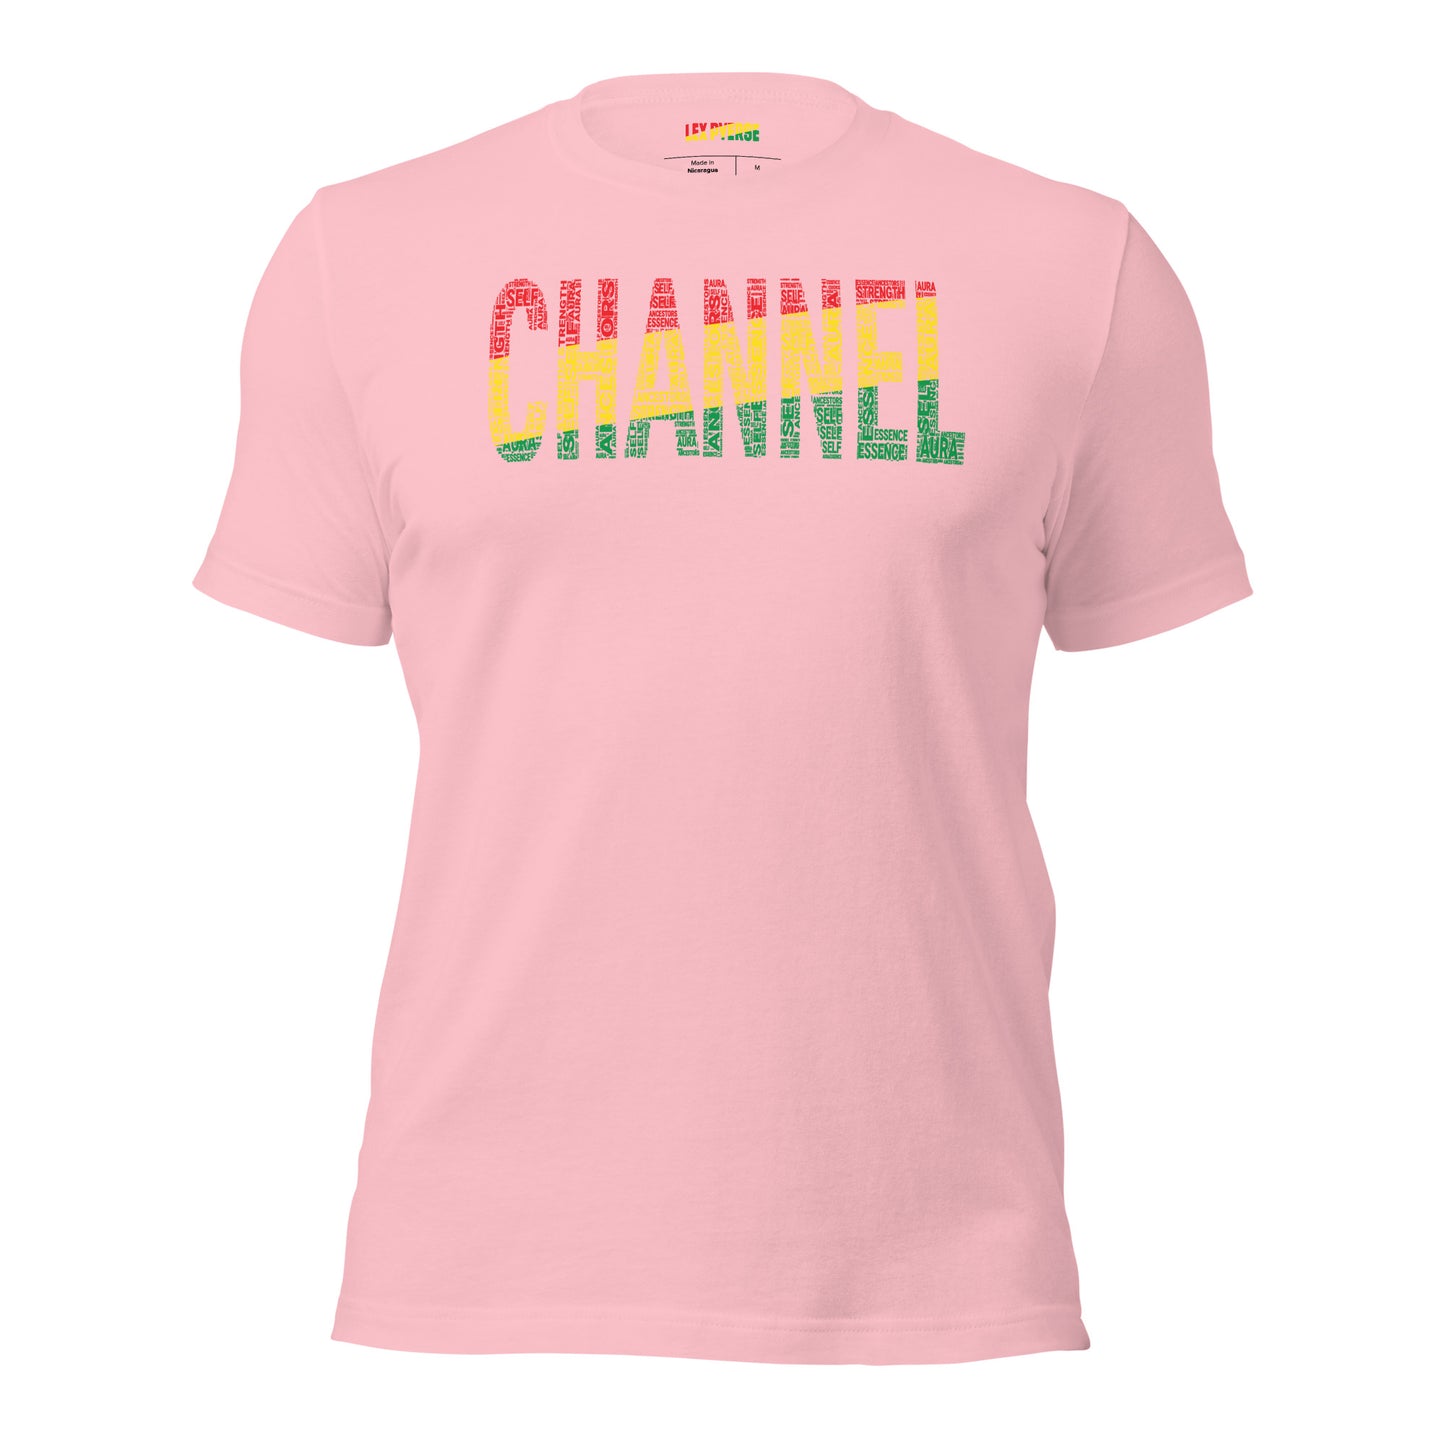 "CHANNEL" Pan-African Colored Short-Sleeve Unisex T-Shirt